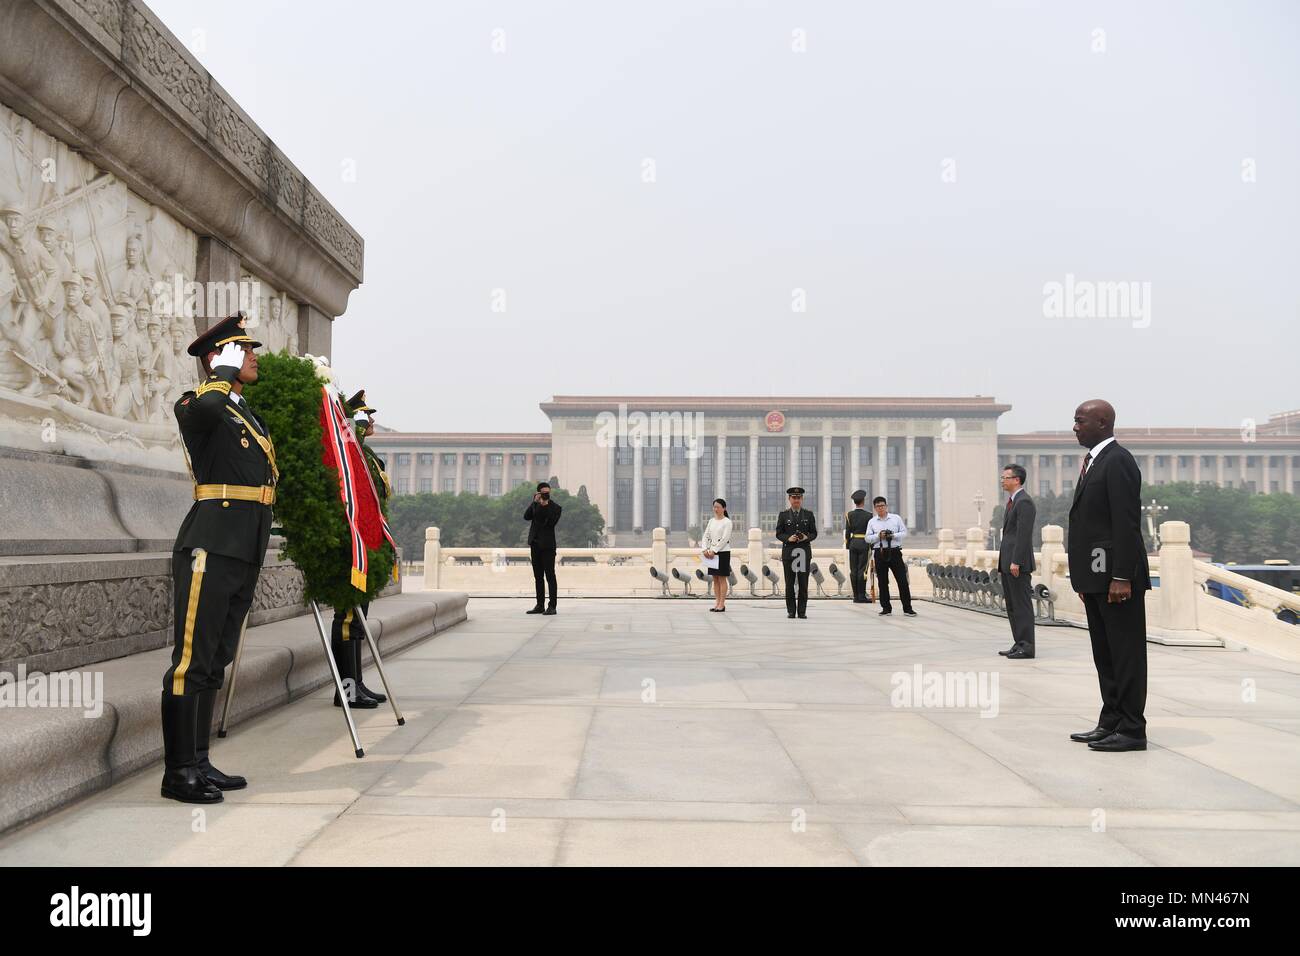 Beijing, China. 14th May, 2018. Prime Minister Keith Rowley of Trinidad and Tobago lays a wreath to the Monument to the People's Heroes at the Tian'anmen Square in Beijing, capital of China, May 14, 2018. Credit: Chen Yehua/Xinhua/Alamy Live News Stock Photo